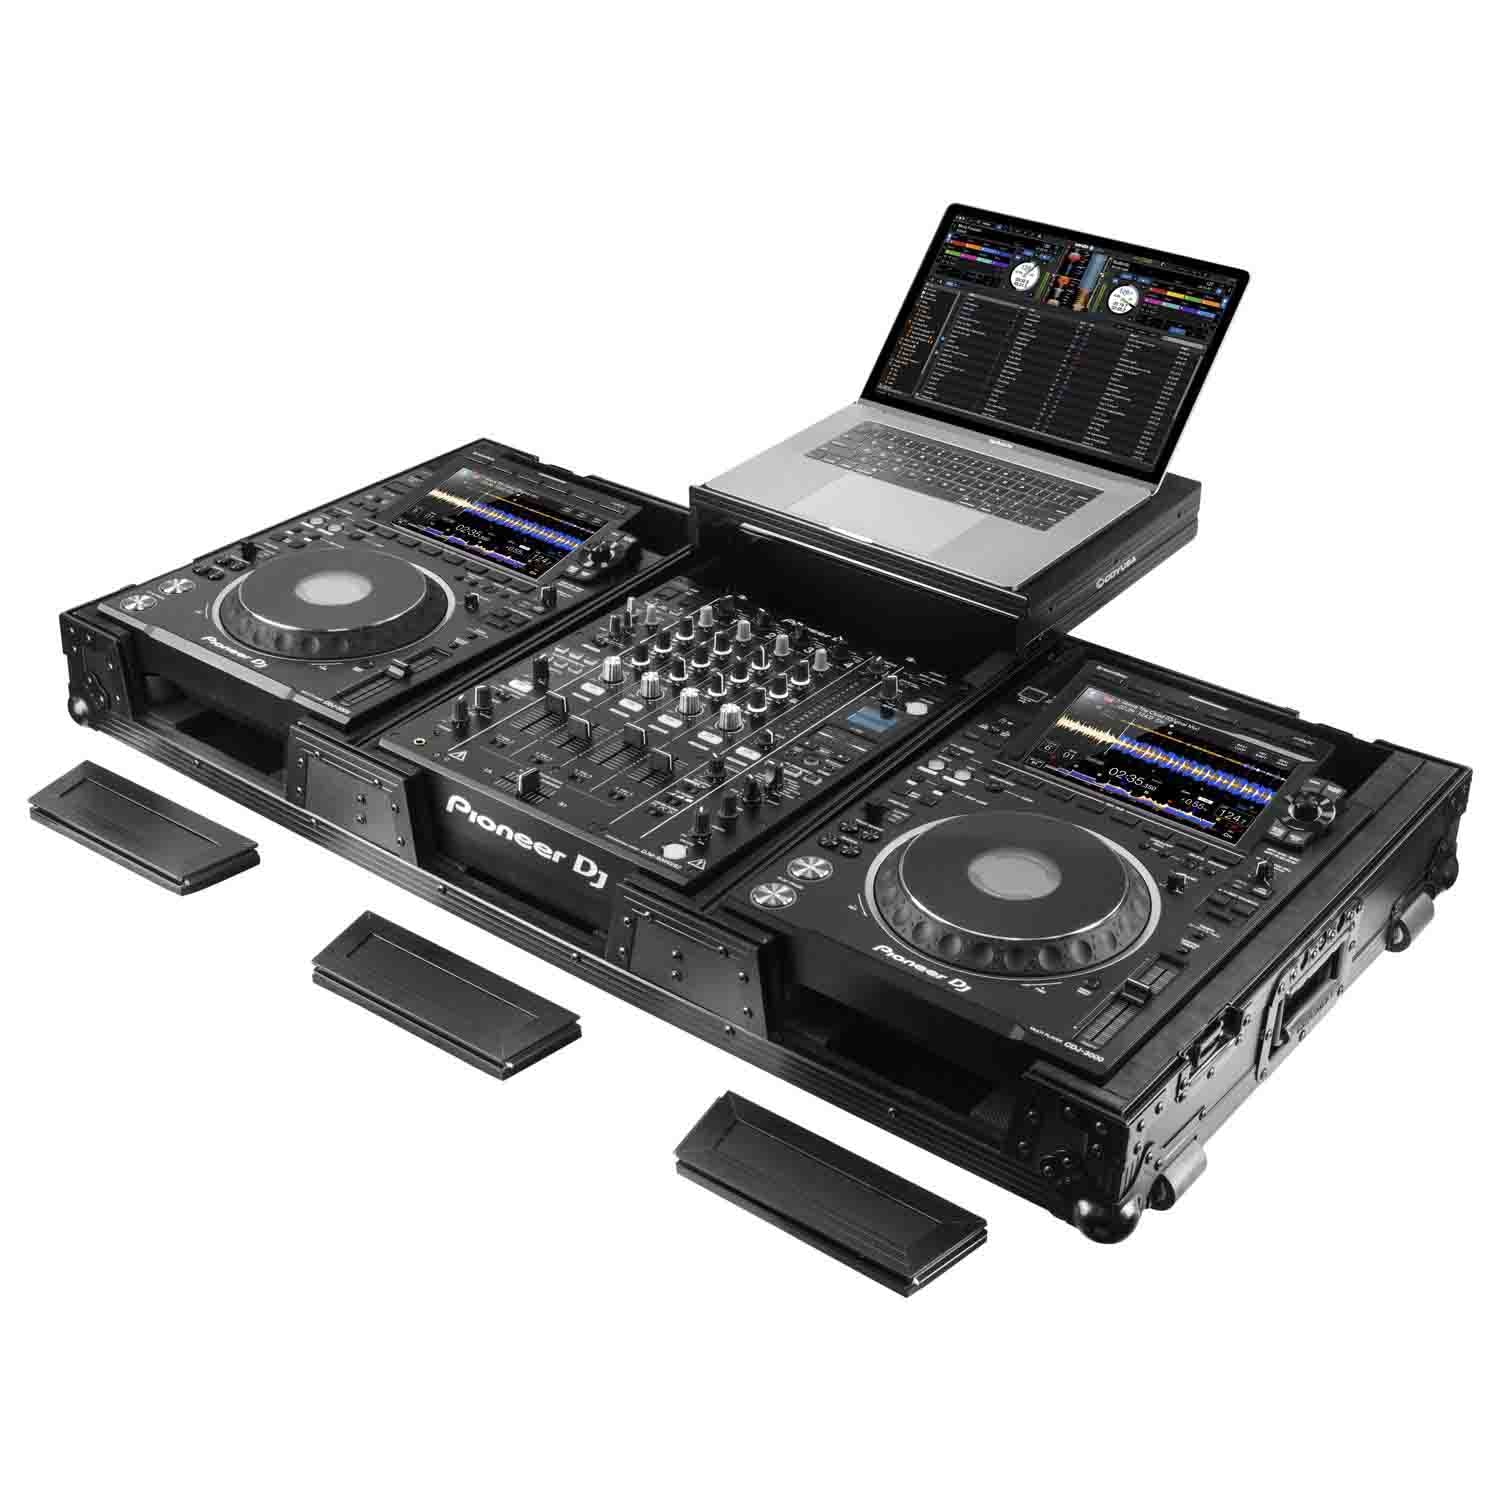 B-Stock: Odyssey FZGS12CDJWXD2BL Extra Deep DJ Coffin Case for 12″ Format DJ Mixer and Two Media Players with Glide Platform - Black - Hollywood DJ